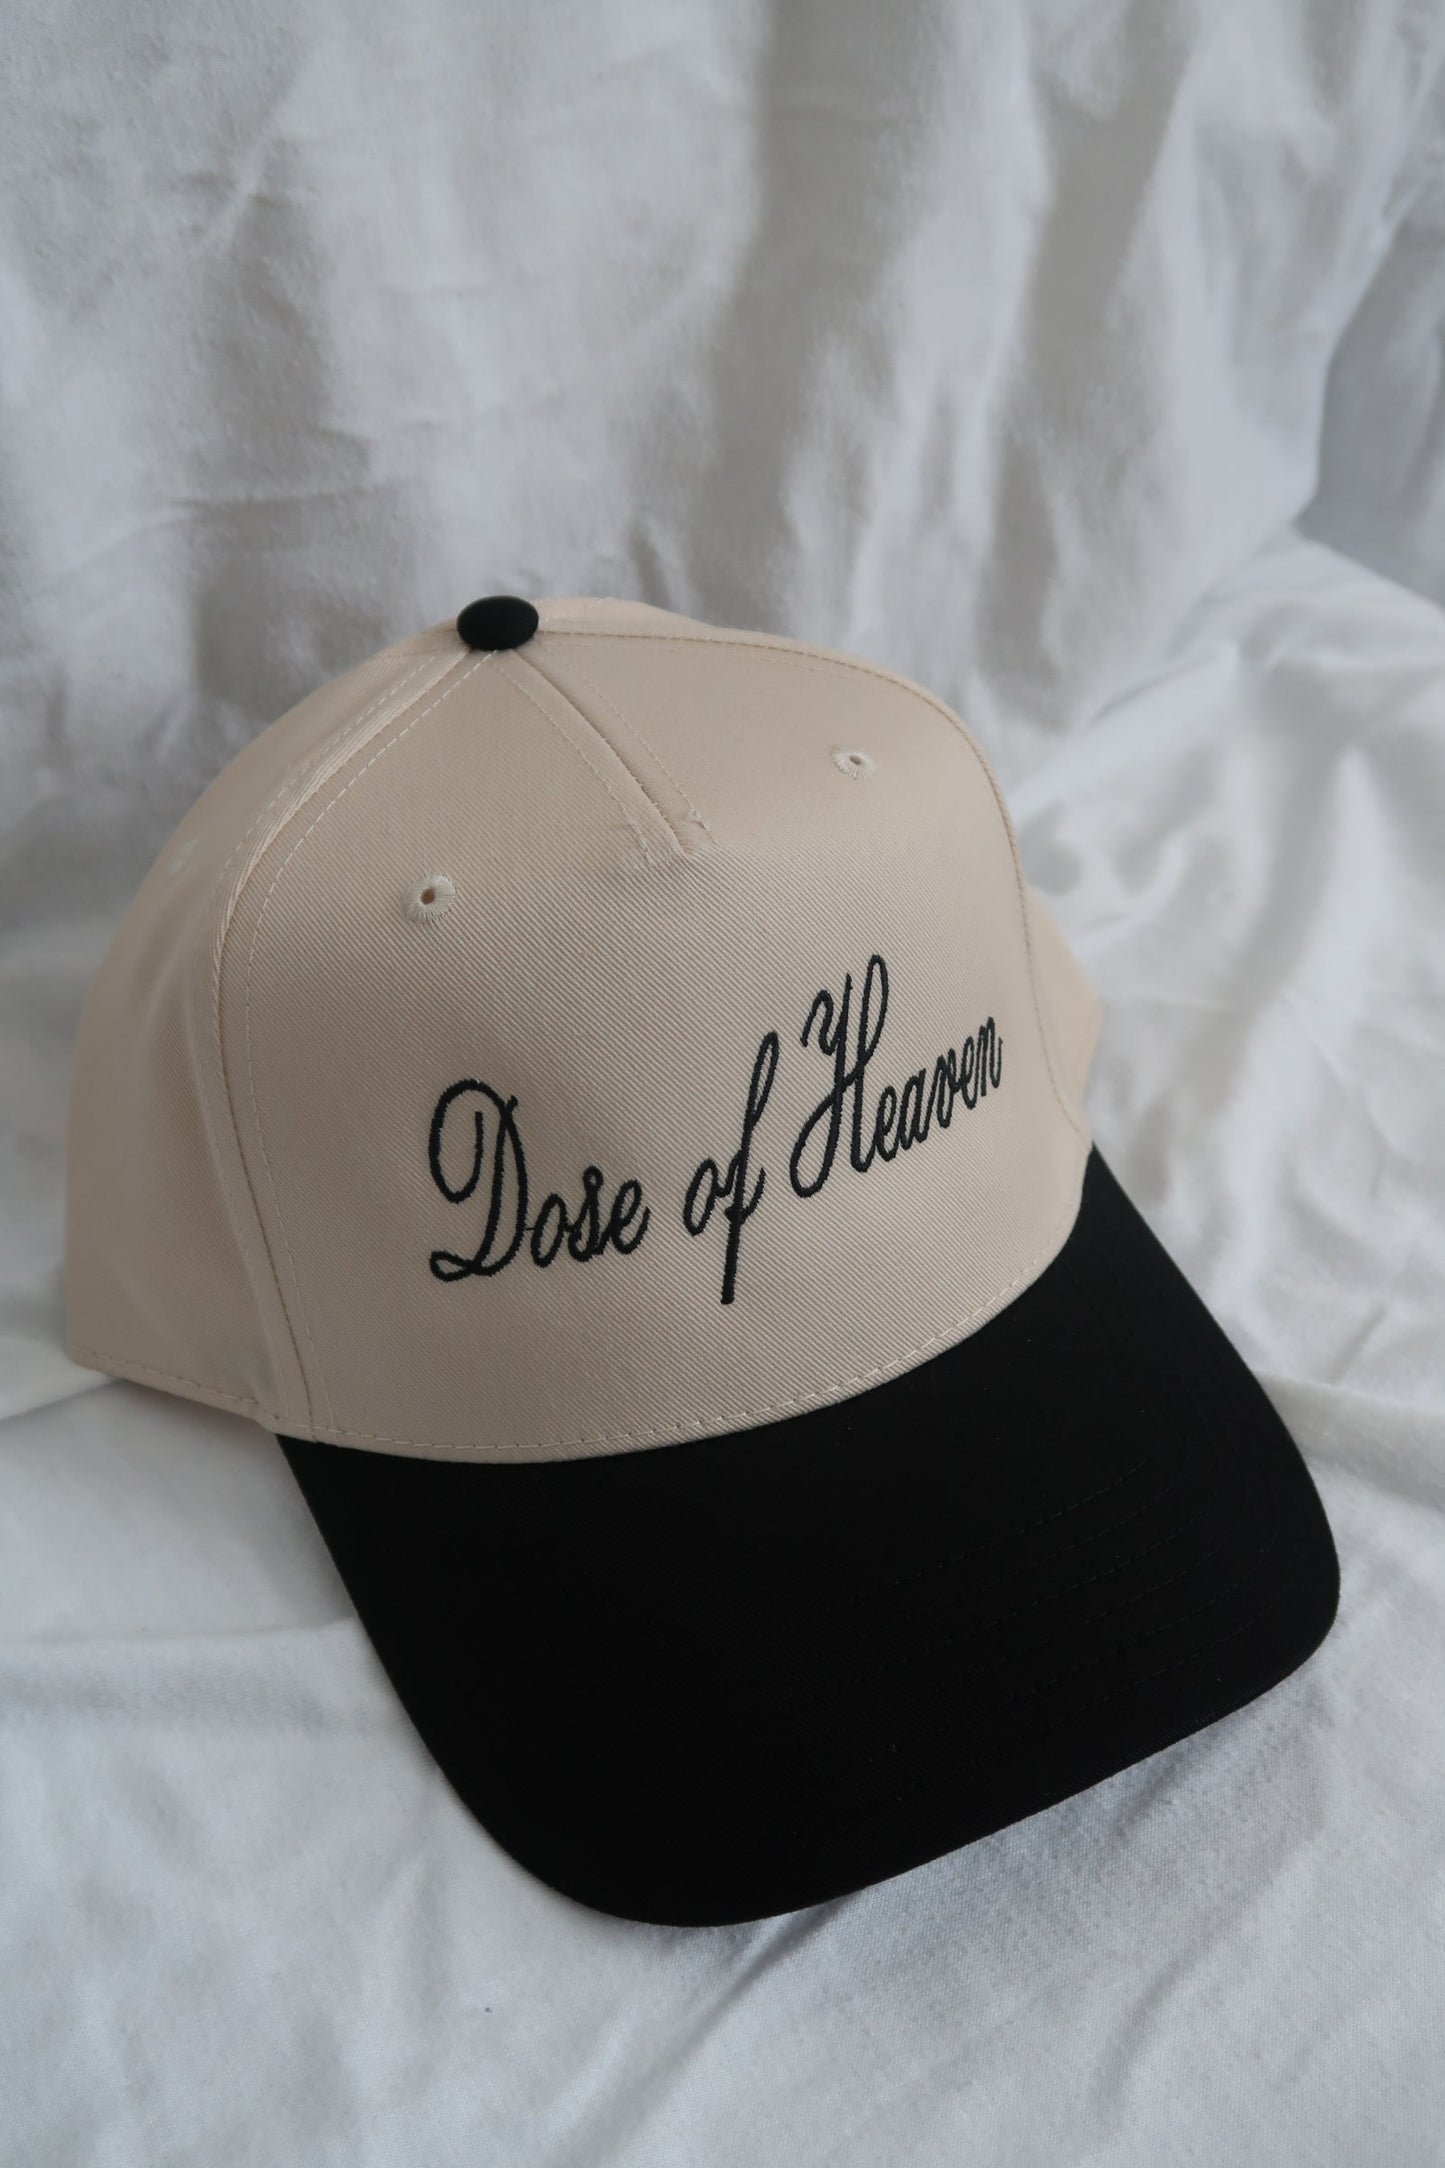 Dose of Heaven Hat